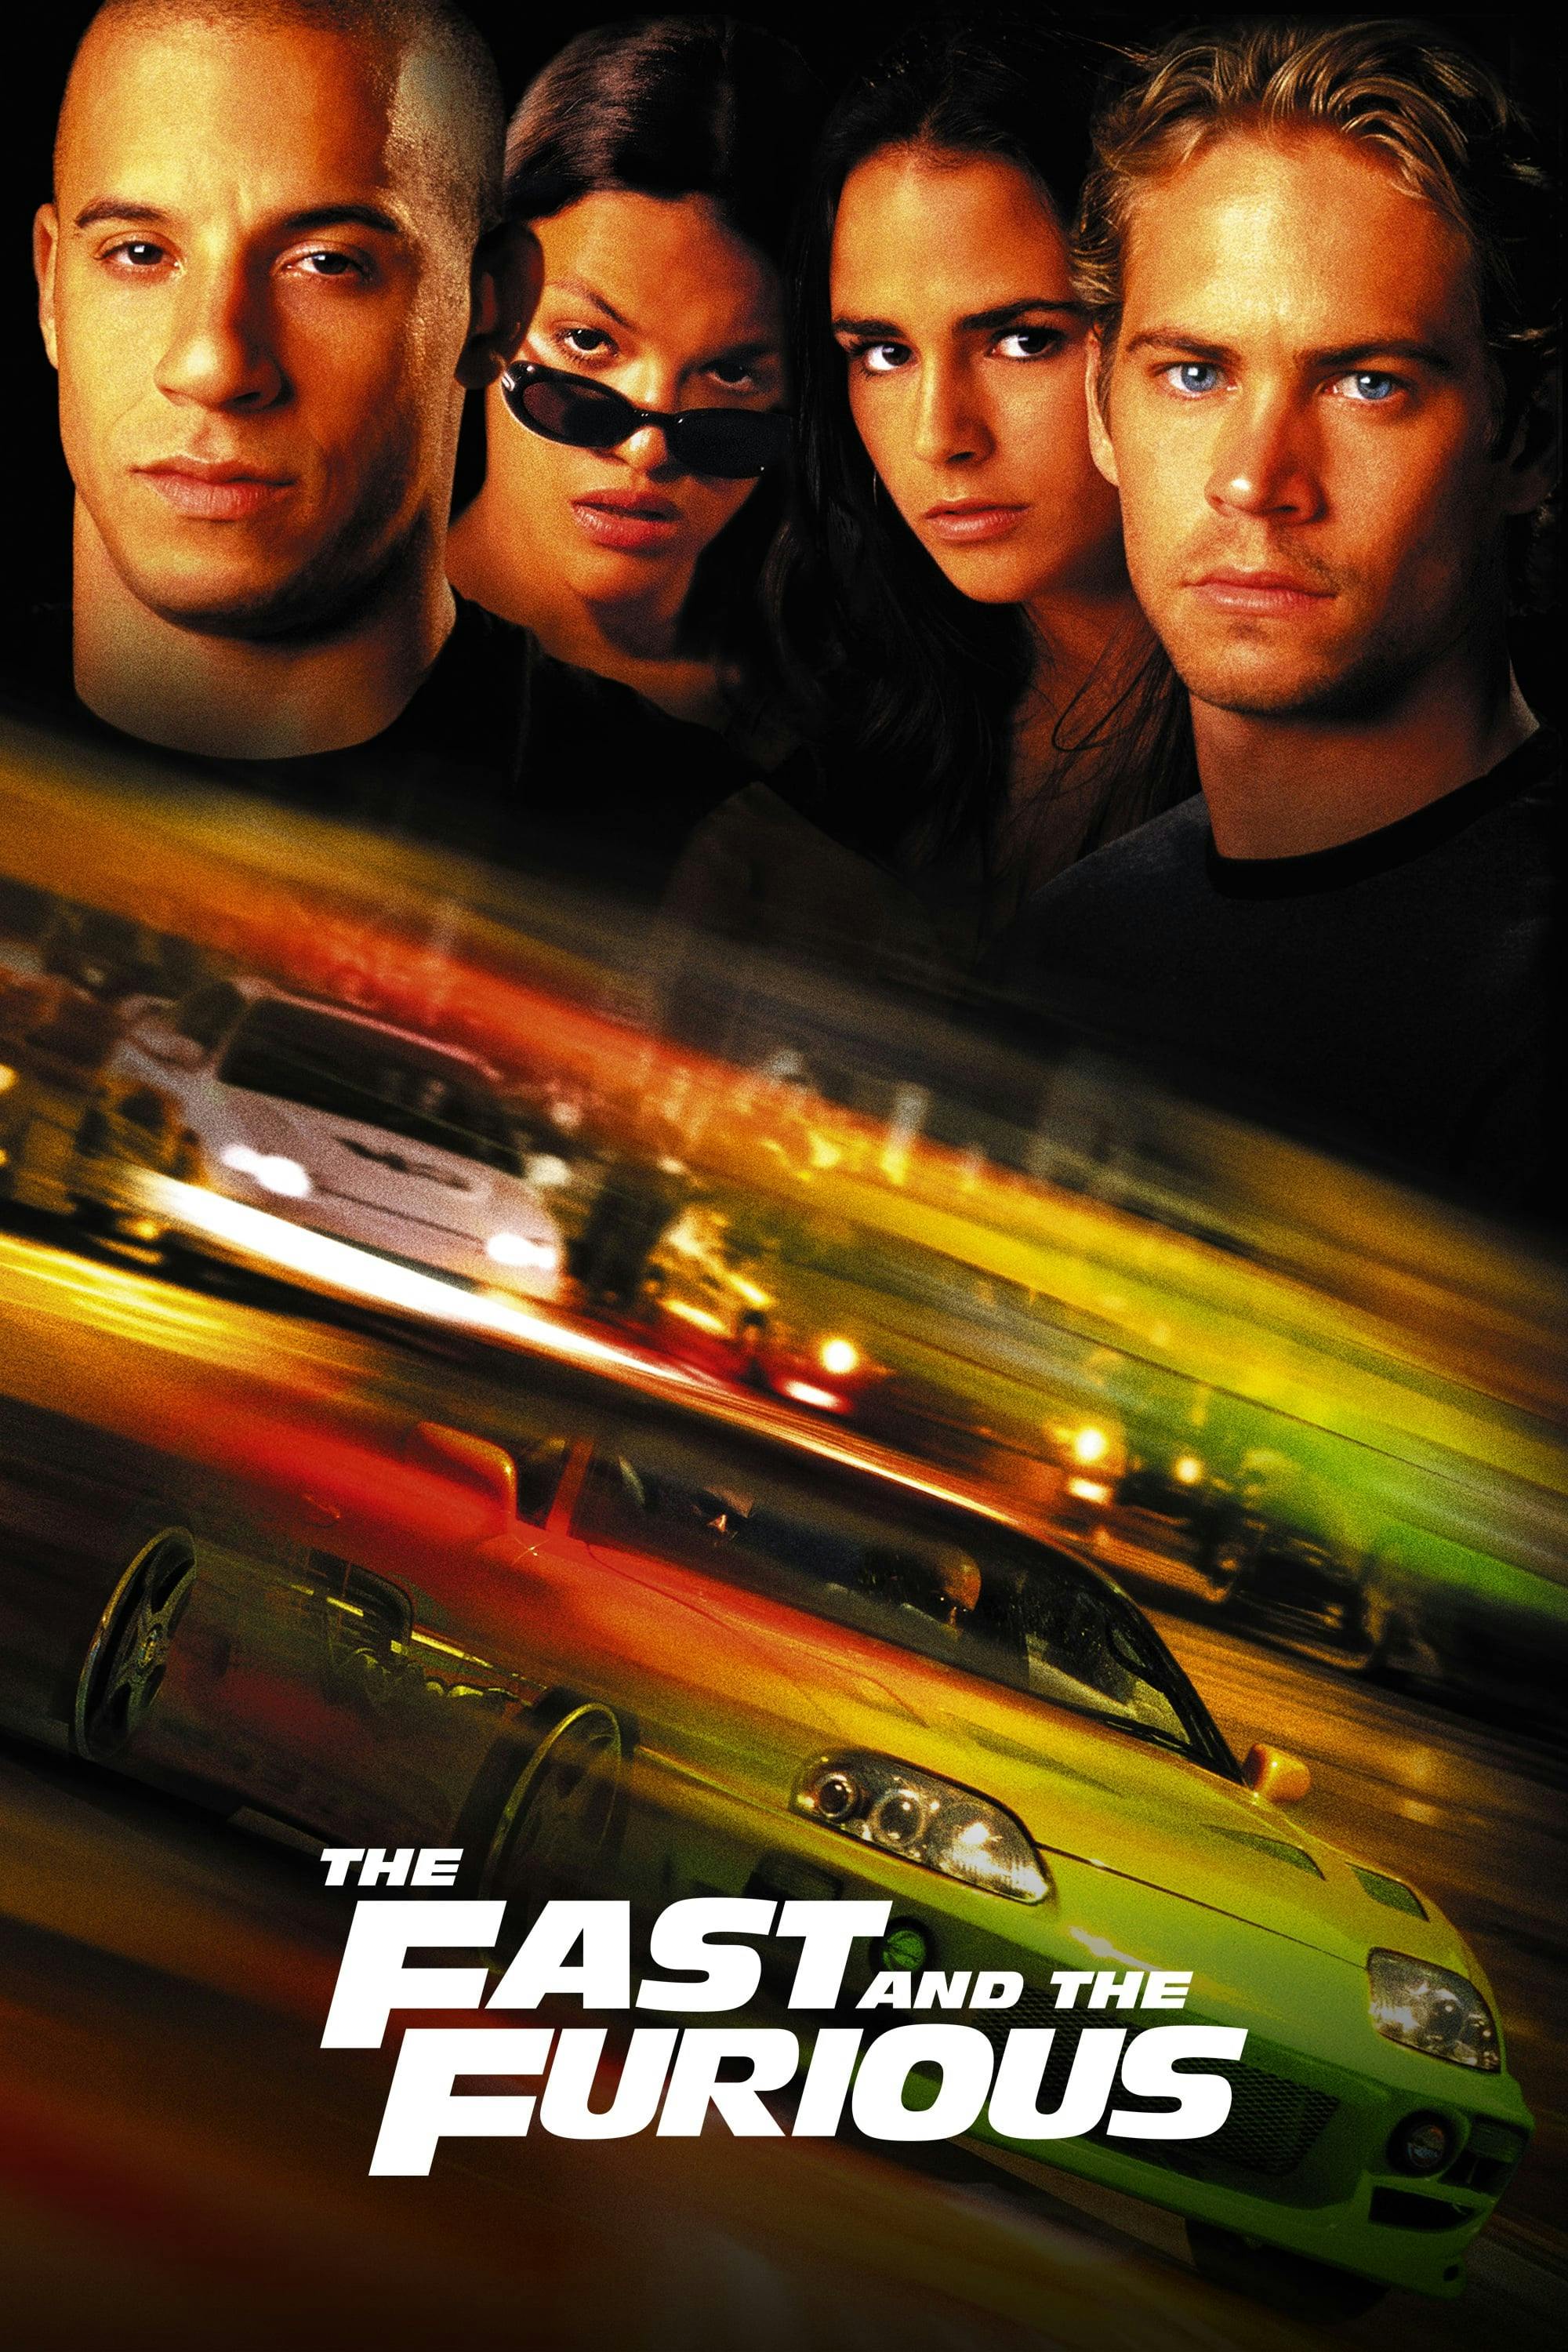 All Fast and Furious movies to watch on Amazon or iTunes